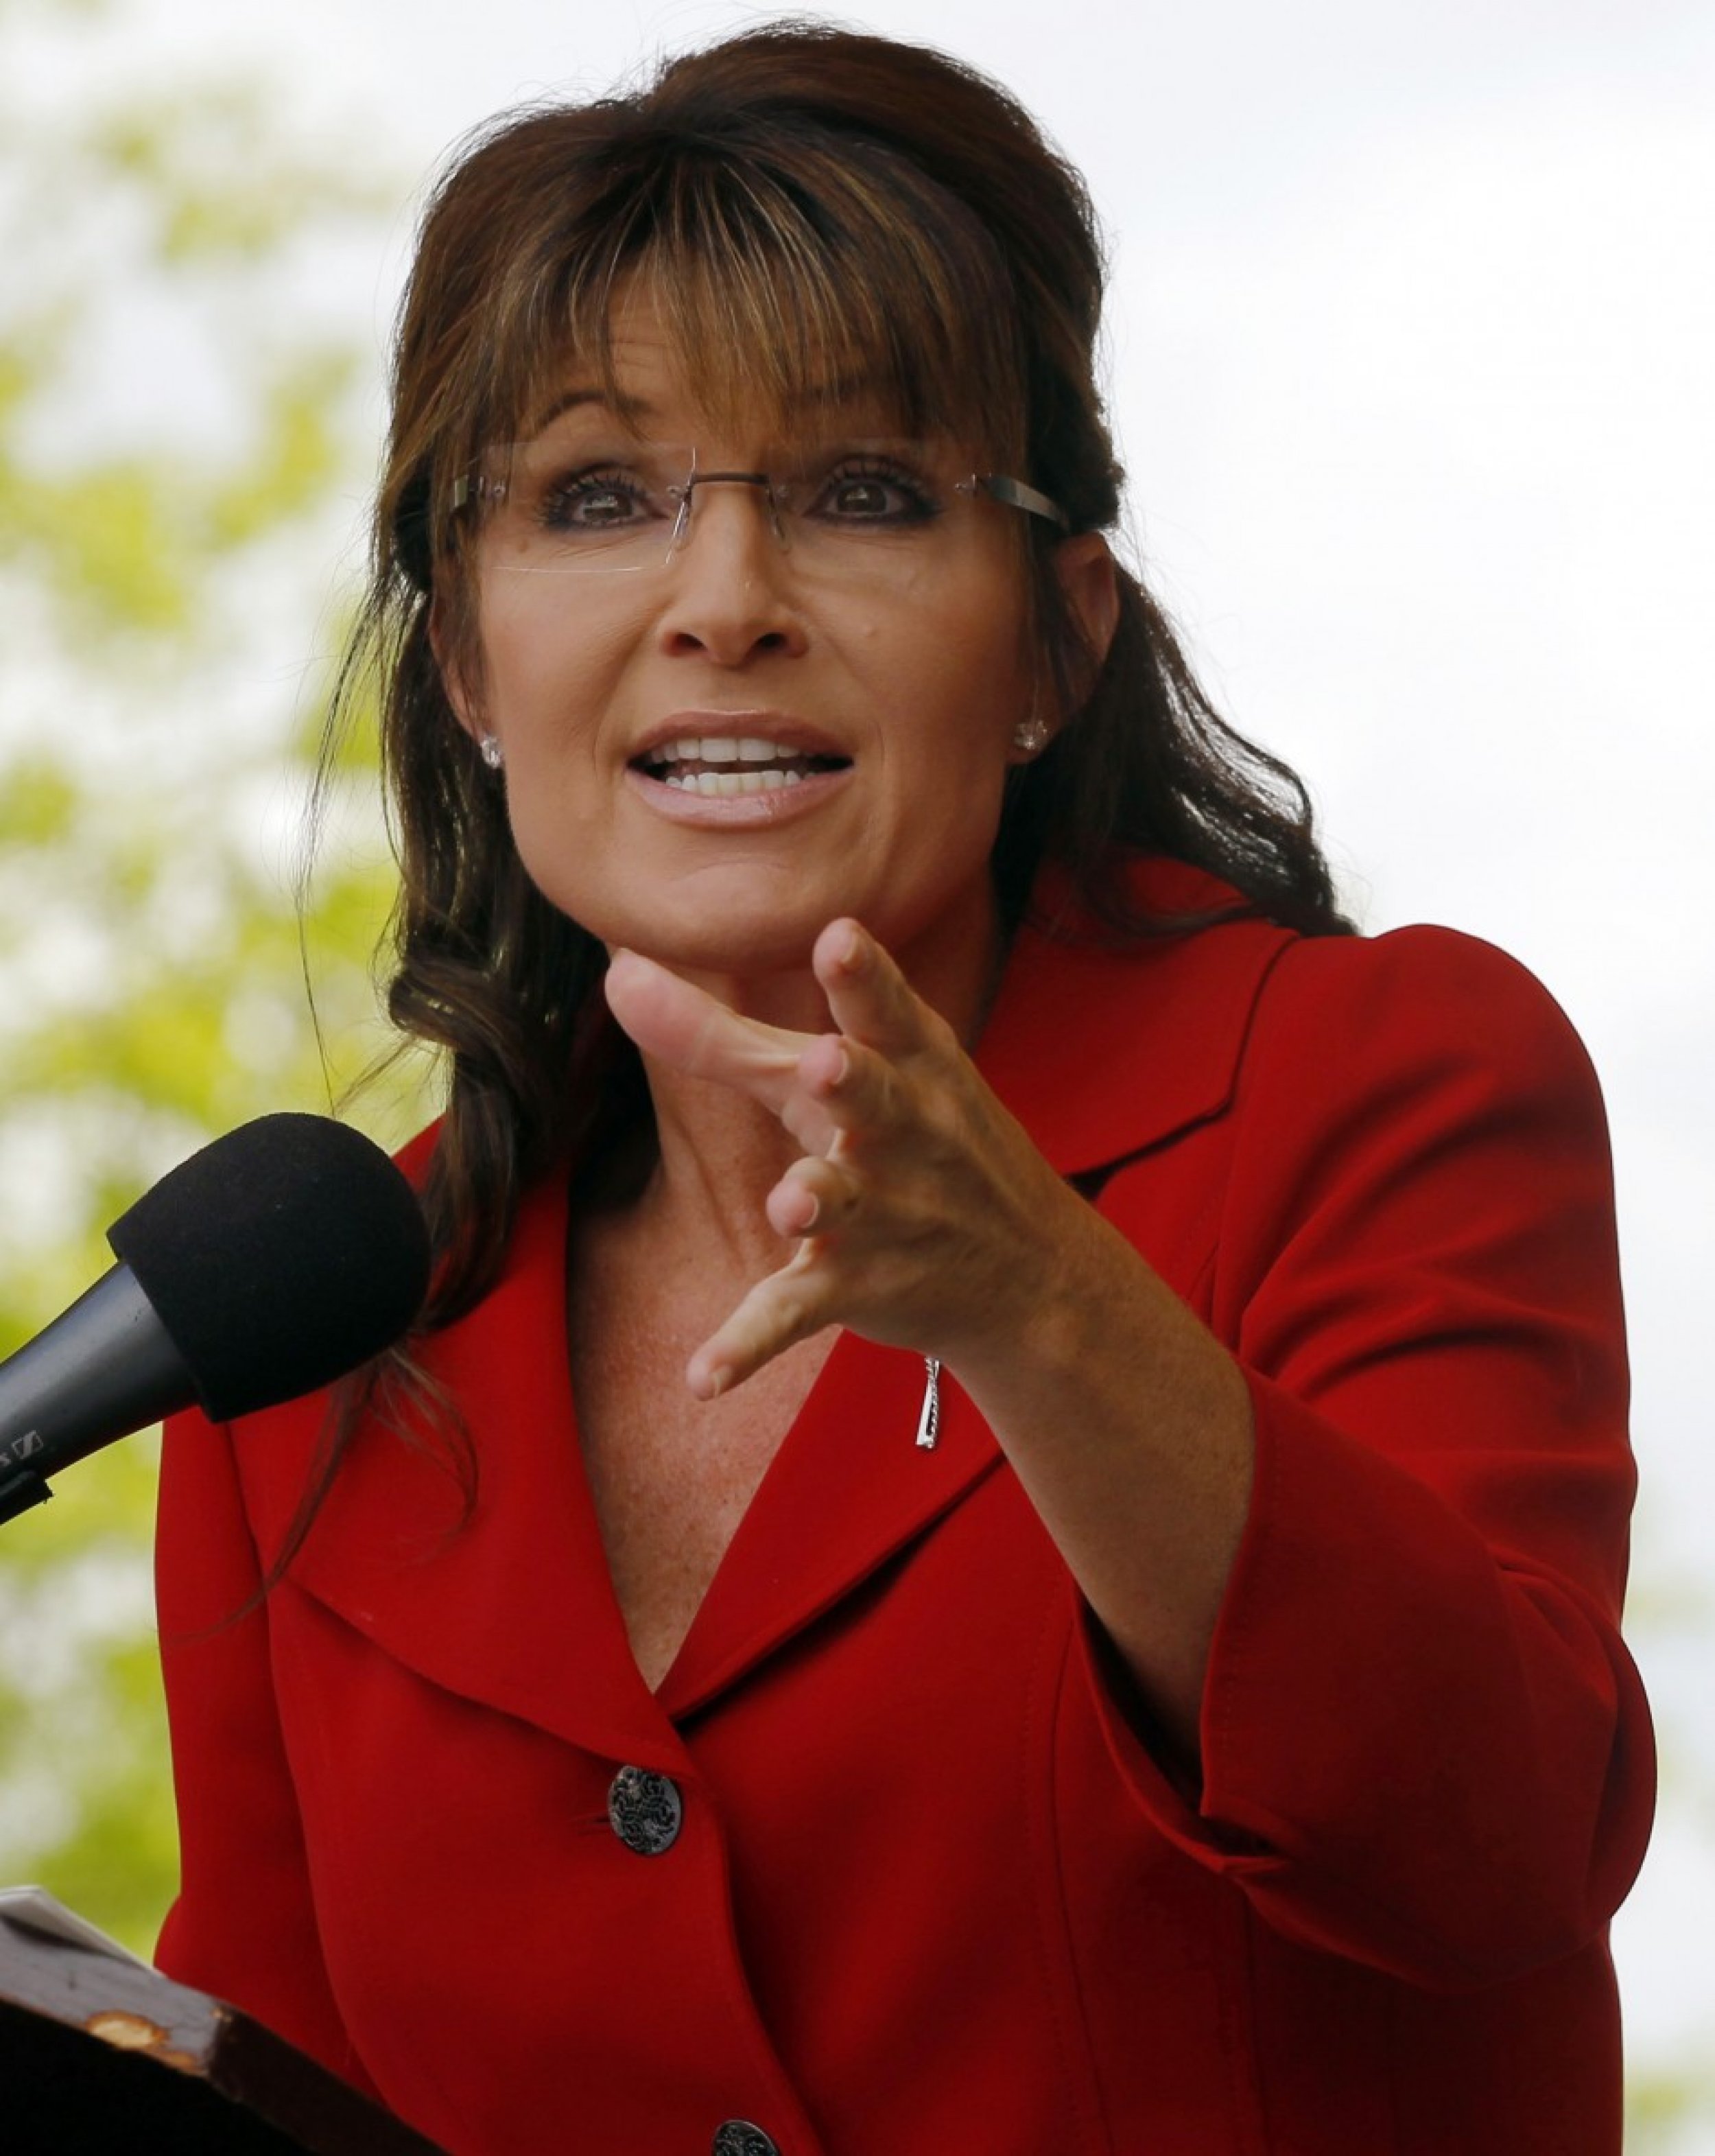 Sarah Palin Hooked Up With Glen Rice According To New Book 